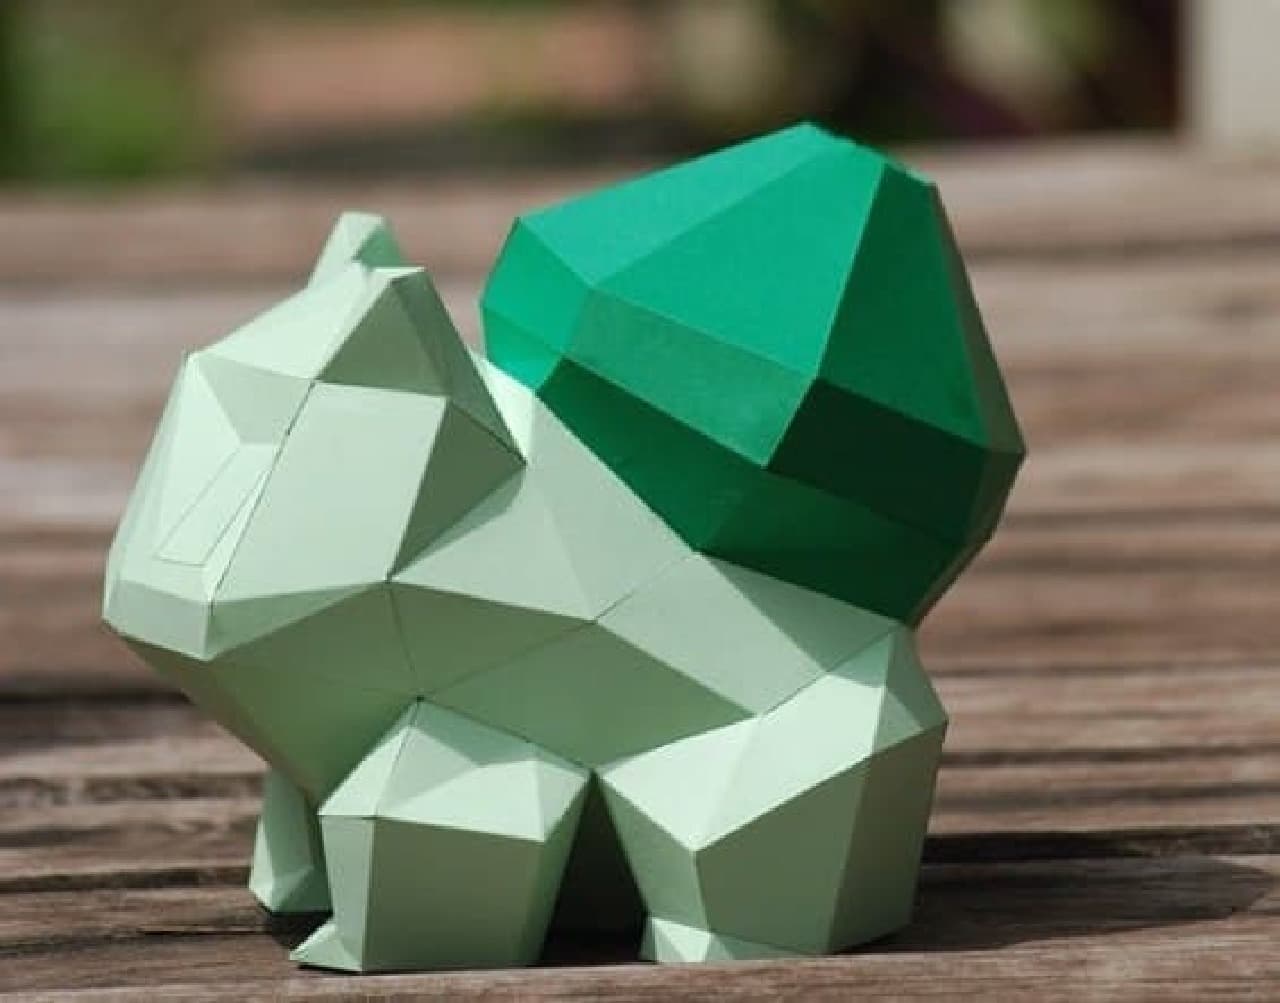 Pokemon made with paper craft "Paper craft DIY Pikachu"